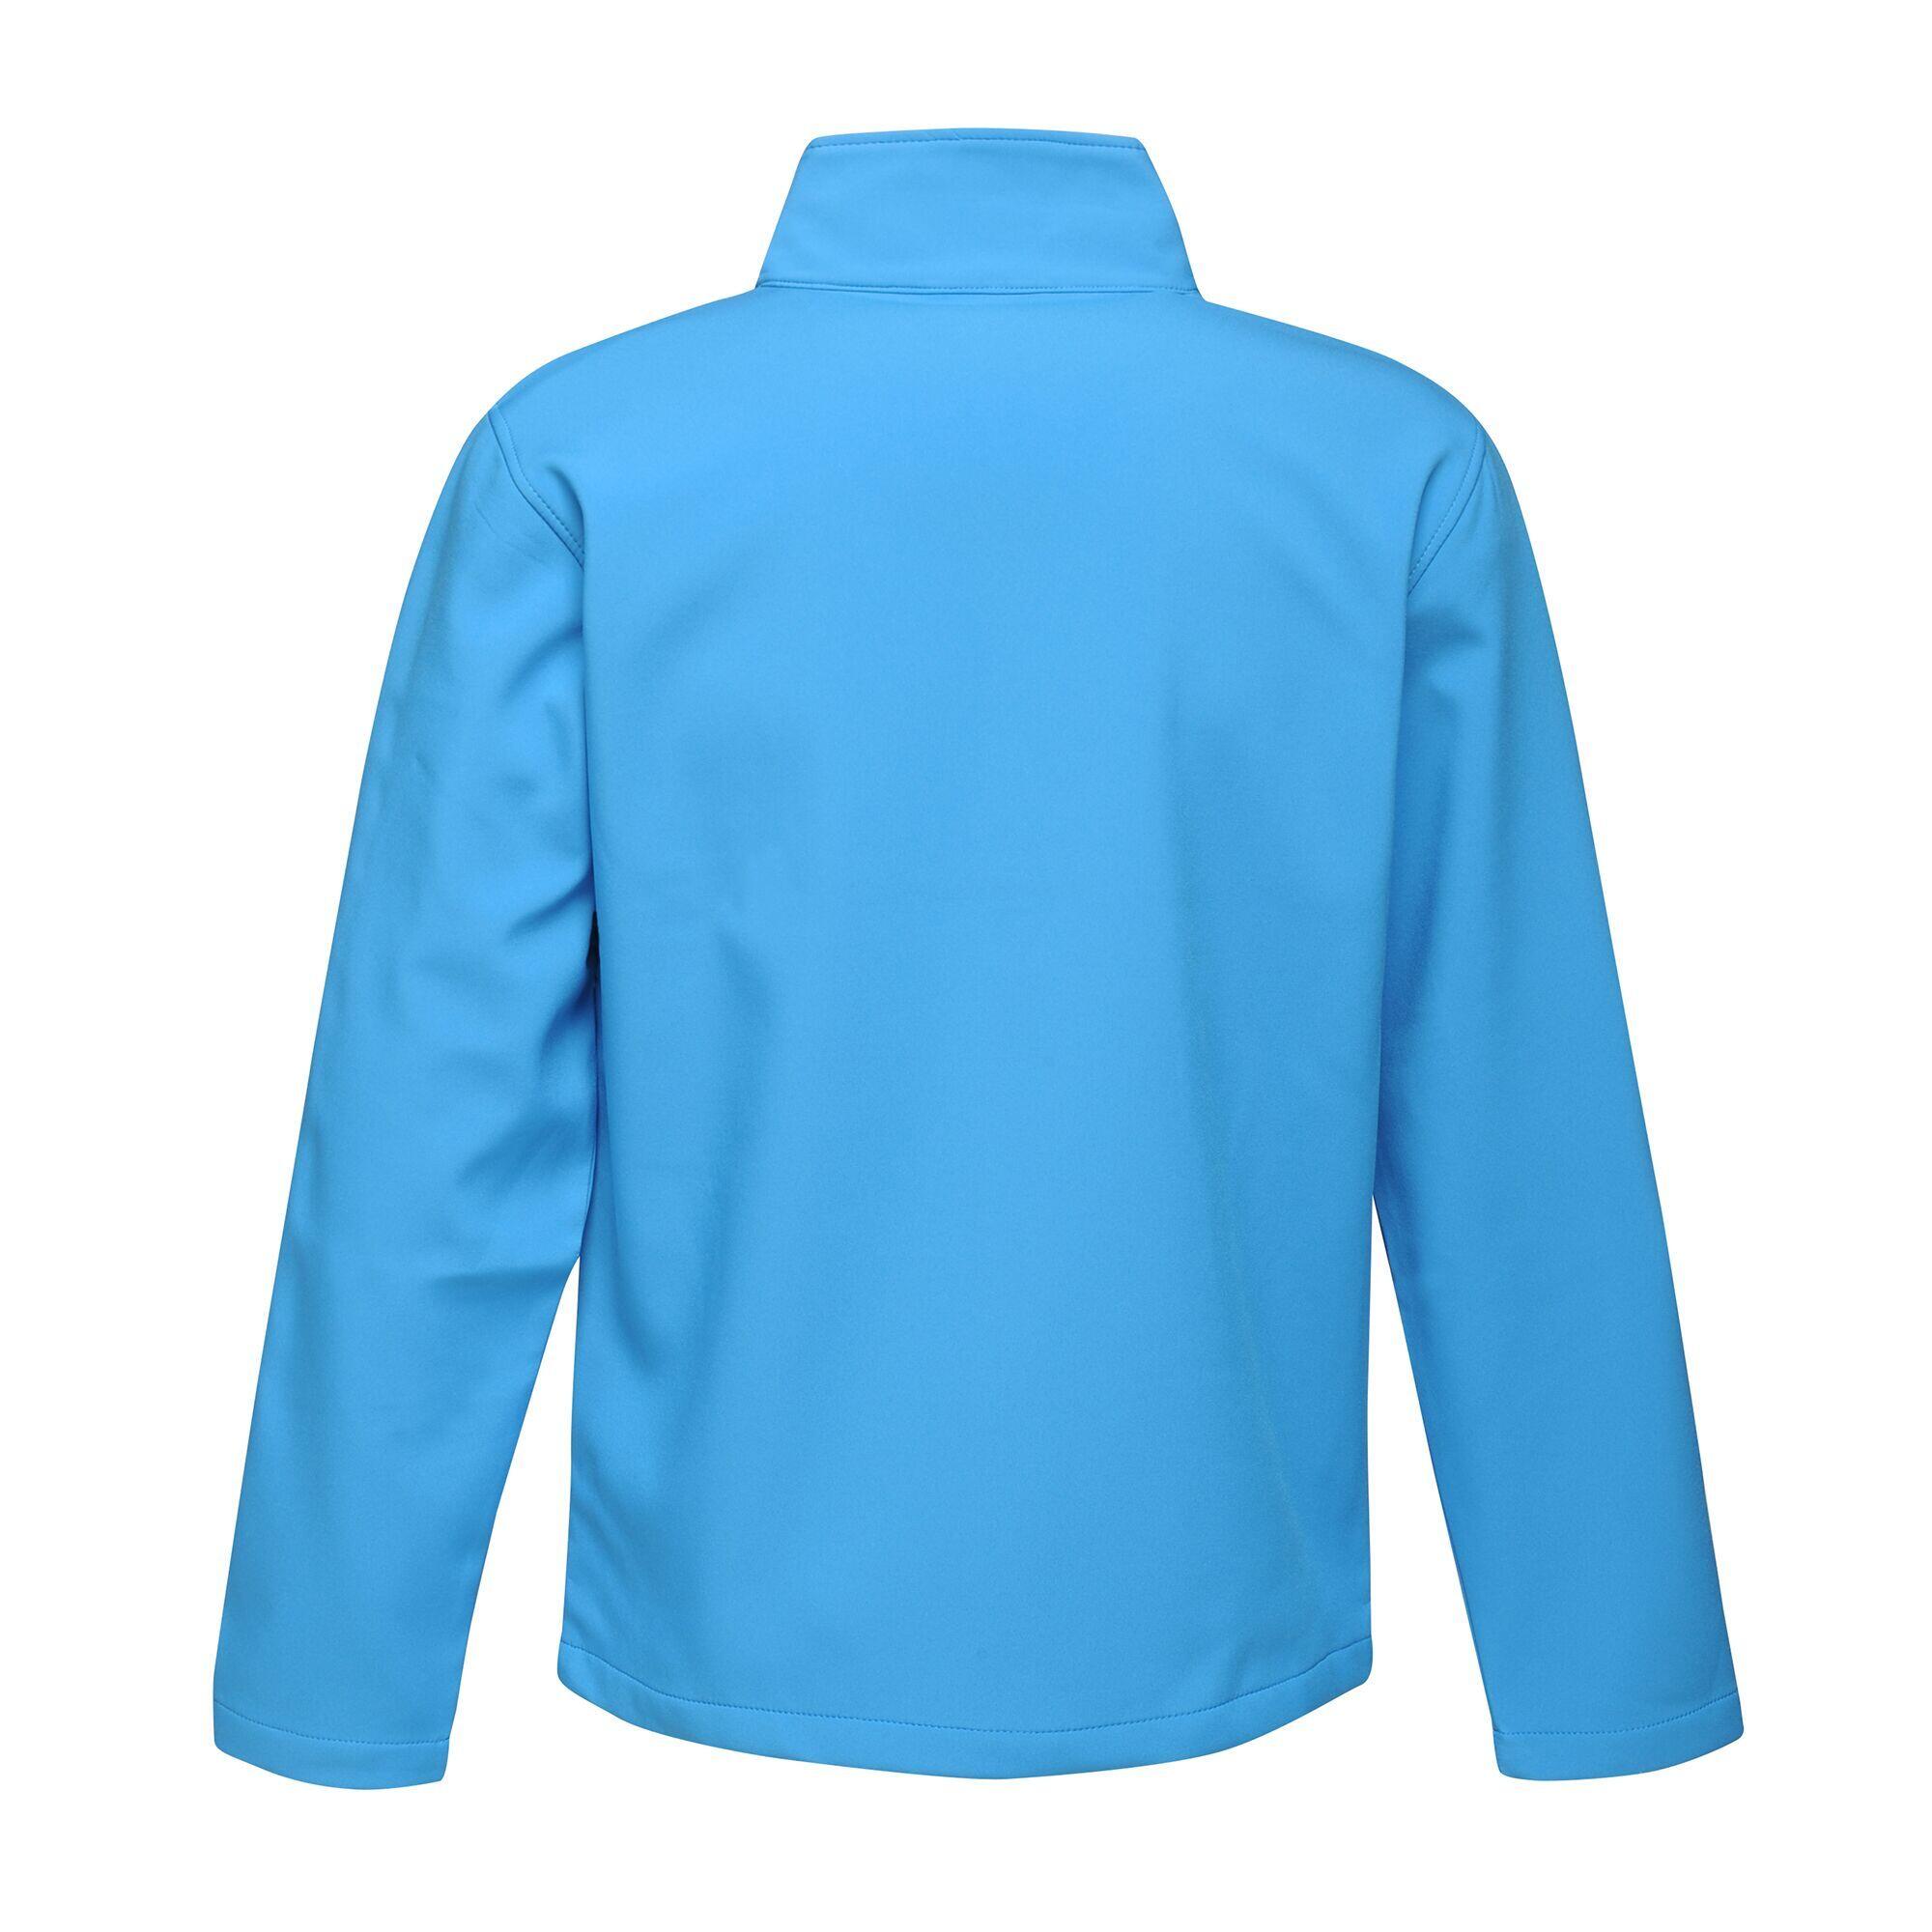 Standout Mens Ablaze Printable Soft Shell Jacket (French Blue/Navy) 2/5